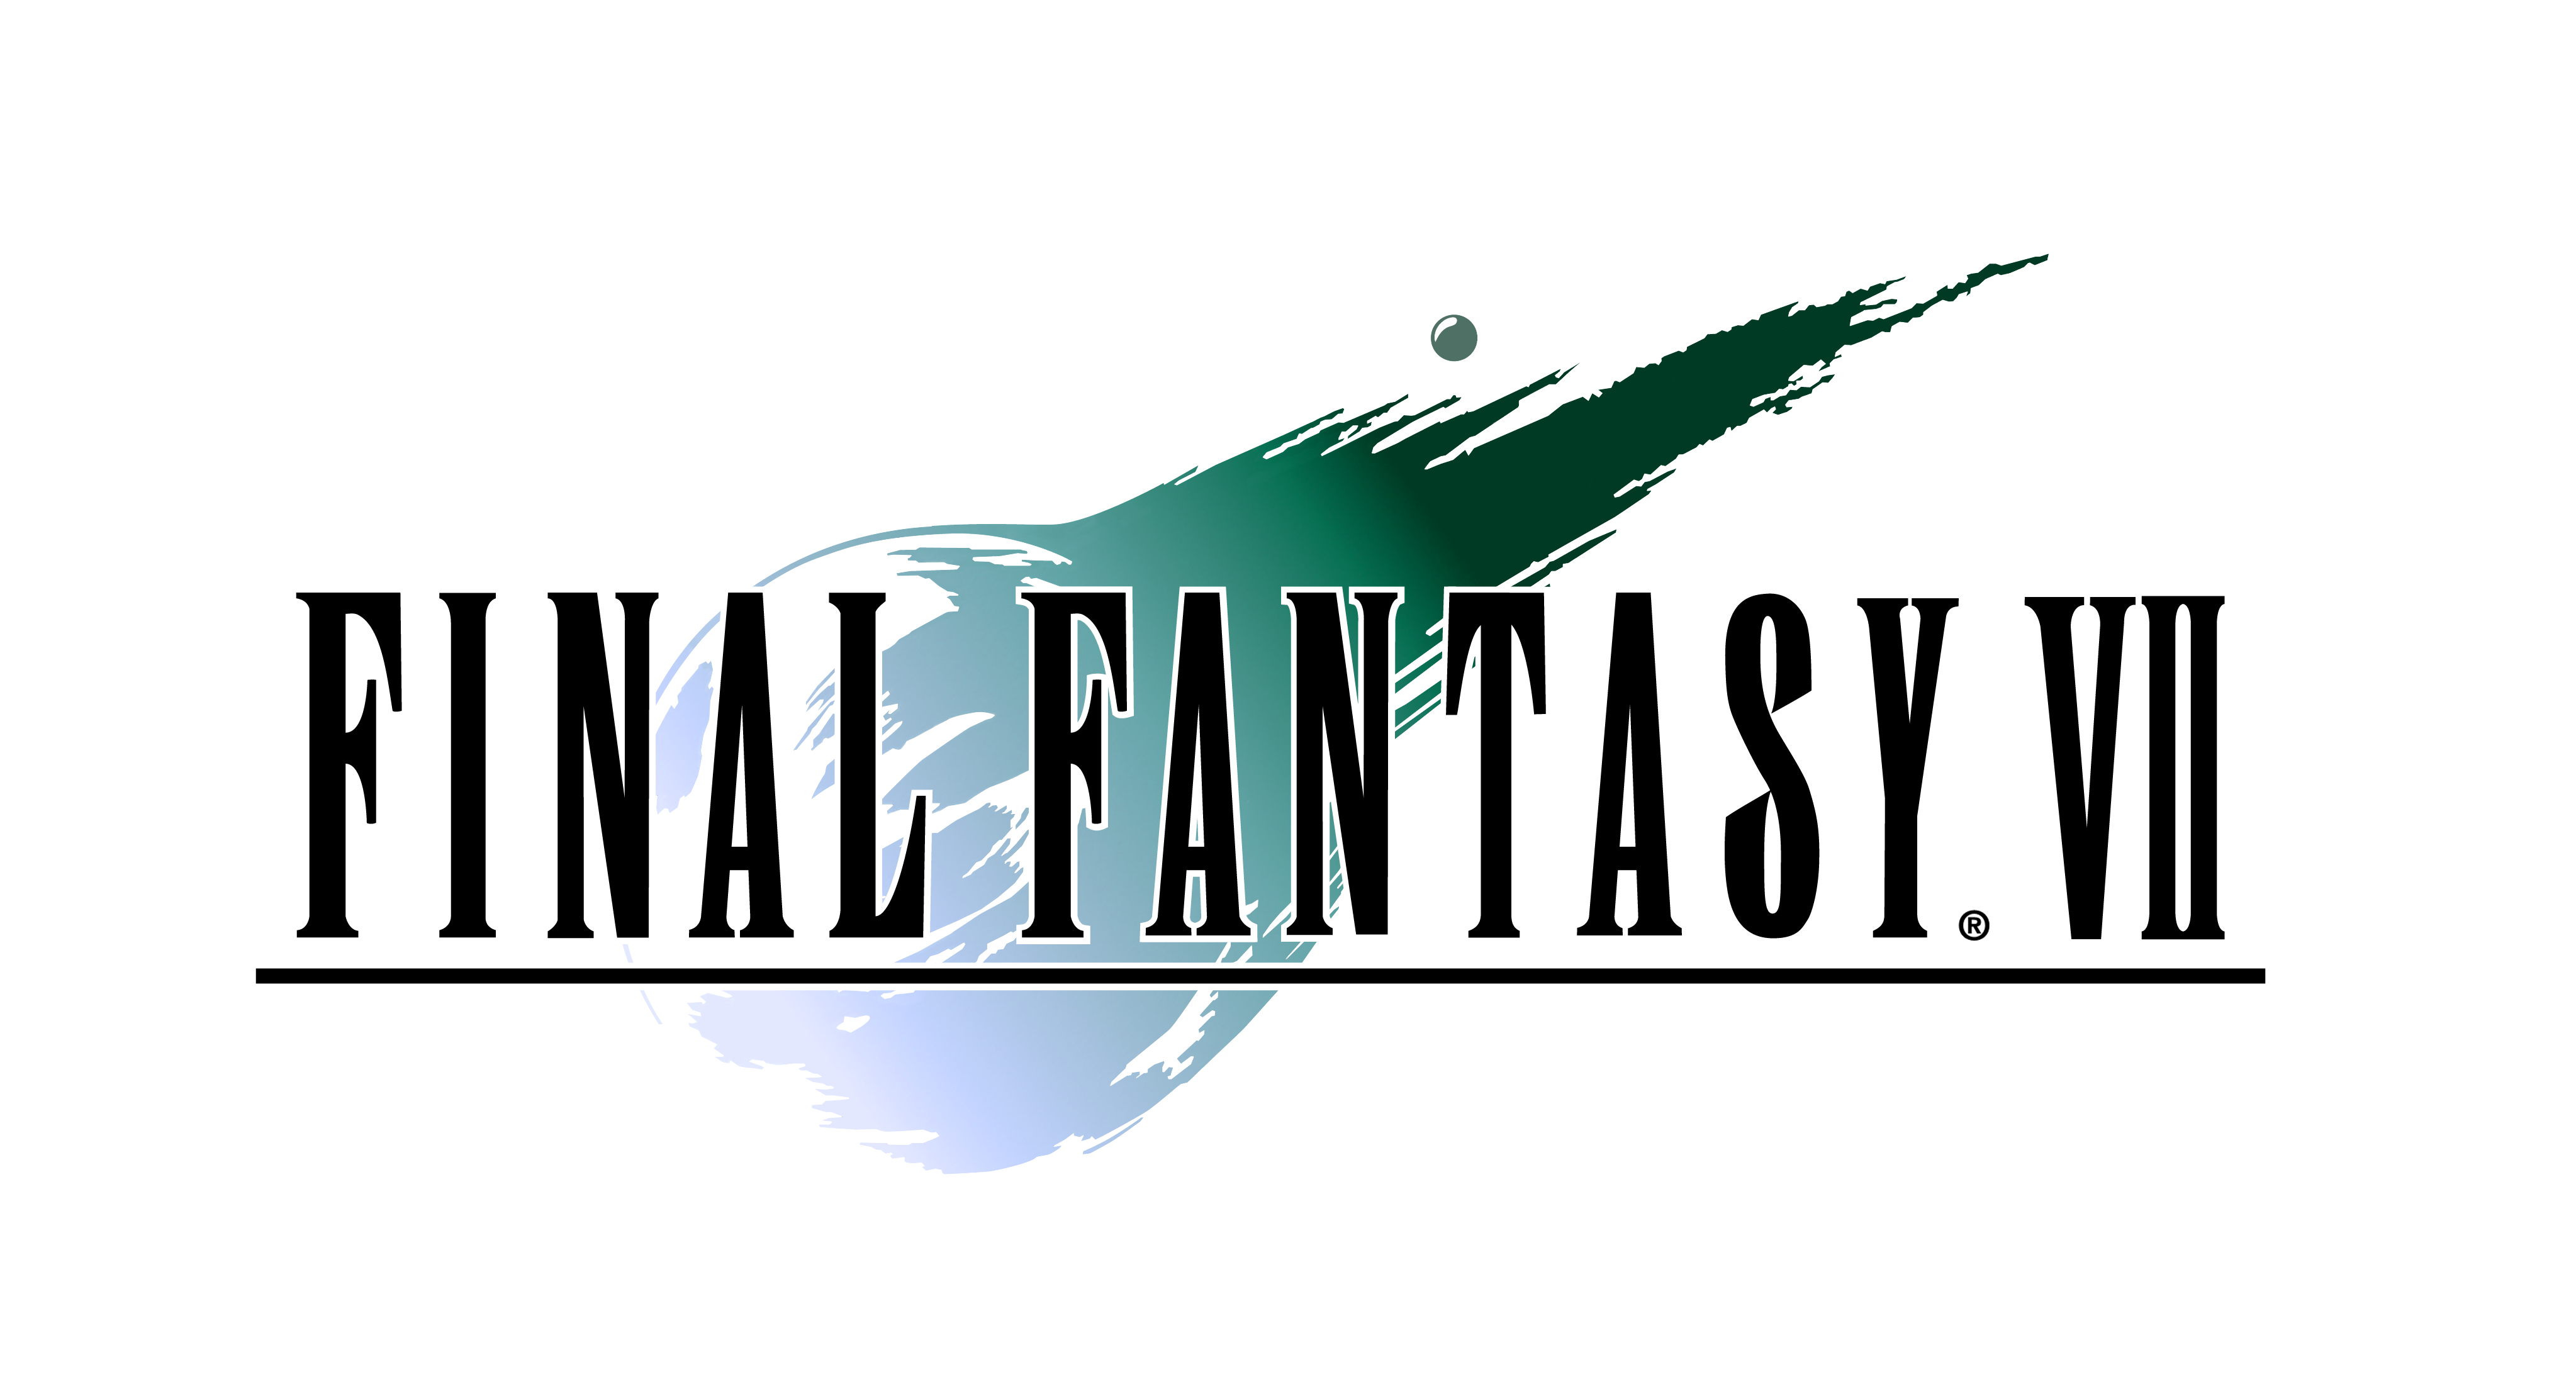 Final Fantasy Vii Has Been Inducted Into The 2018 World Video Game Hall